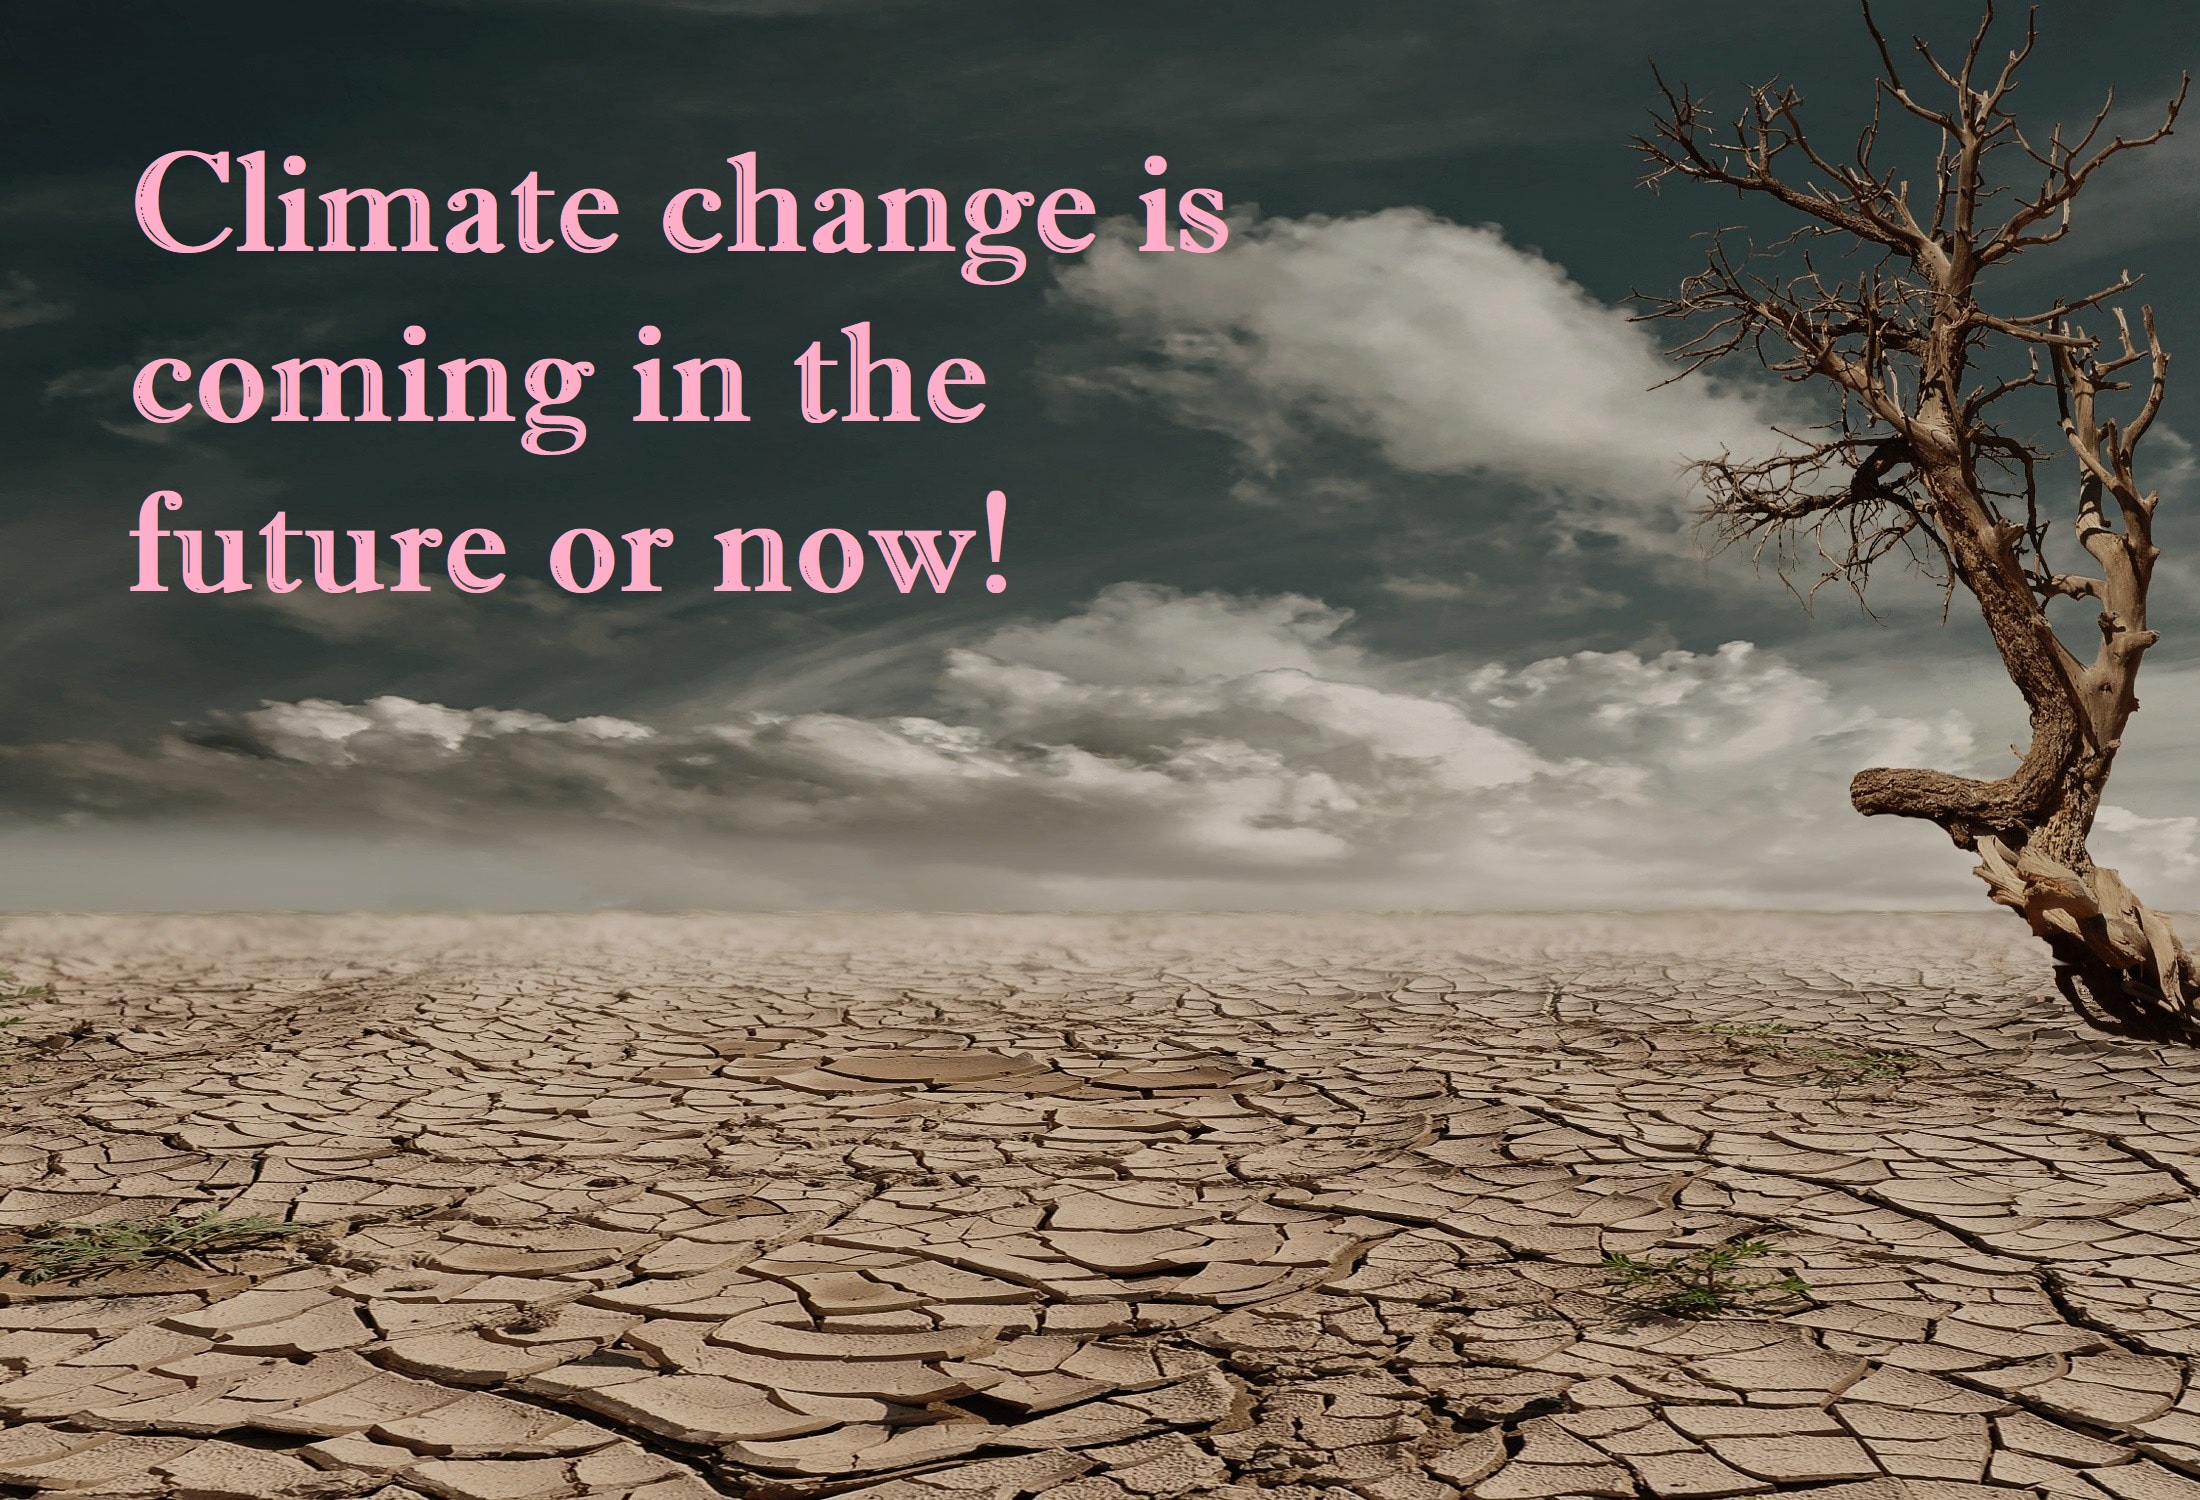 Climate change is coming in the future or now!